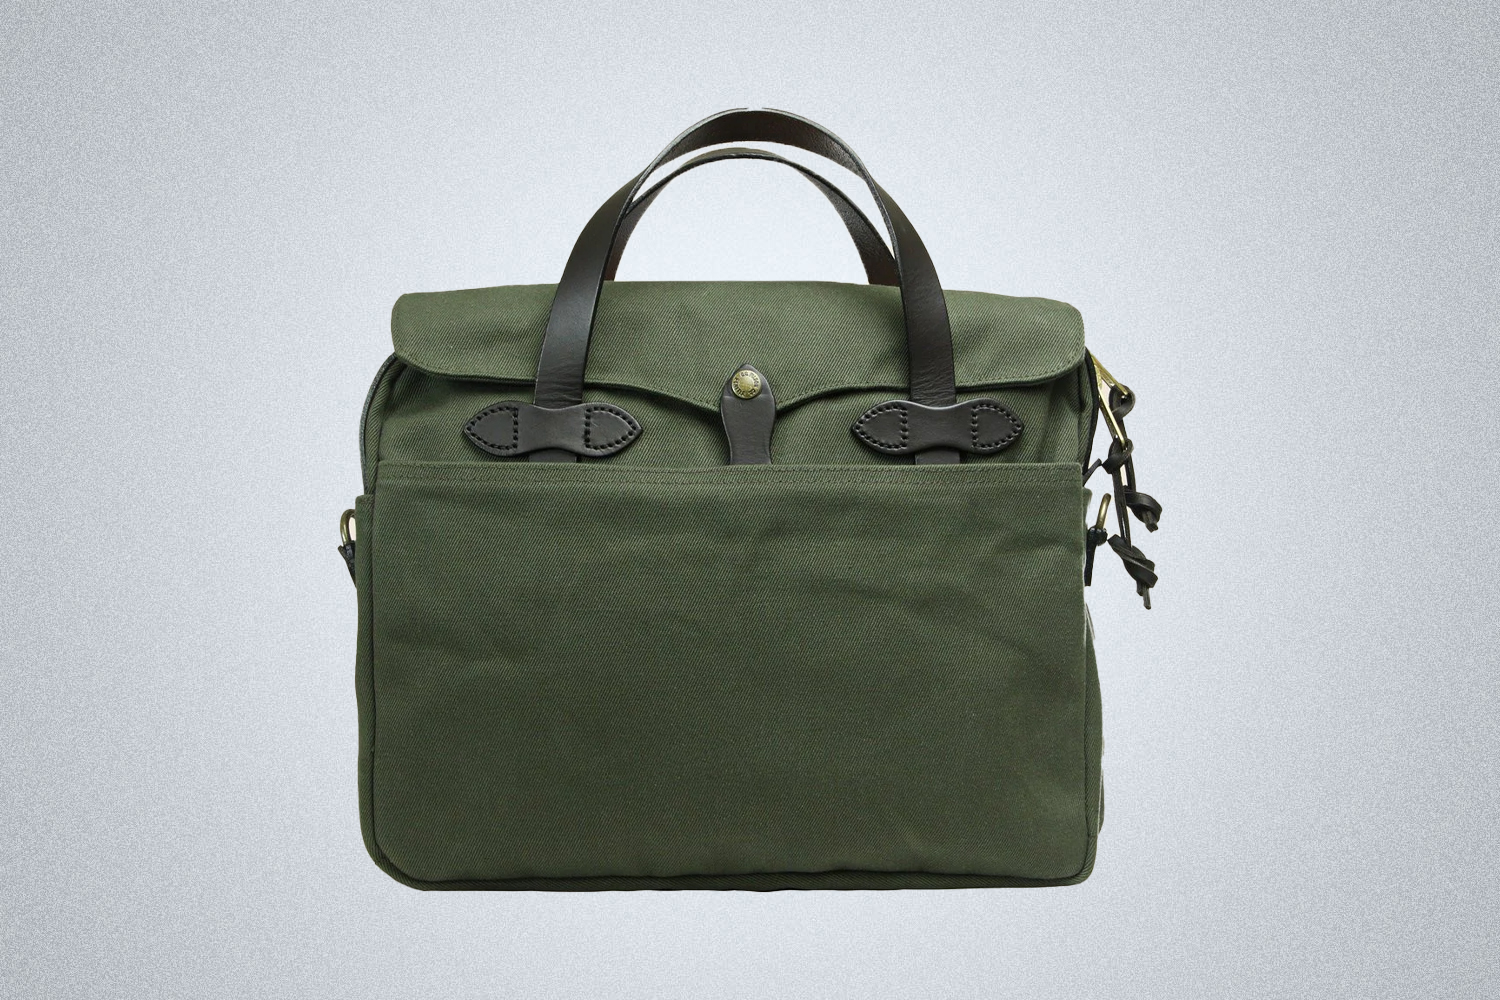 The Filson Original Briefcase is the best luxury grad gift to buy in 2022